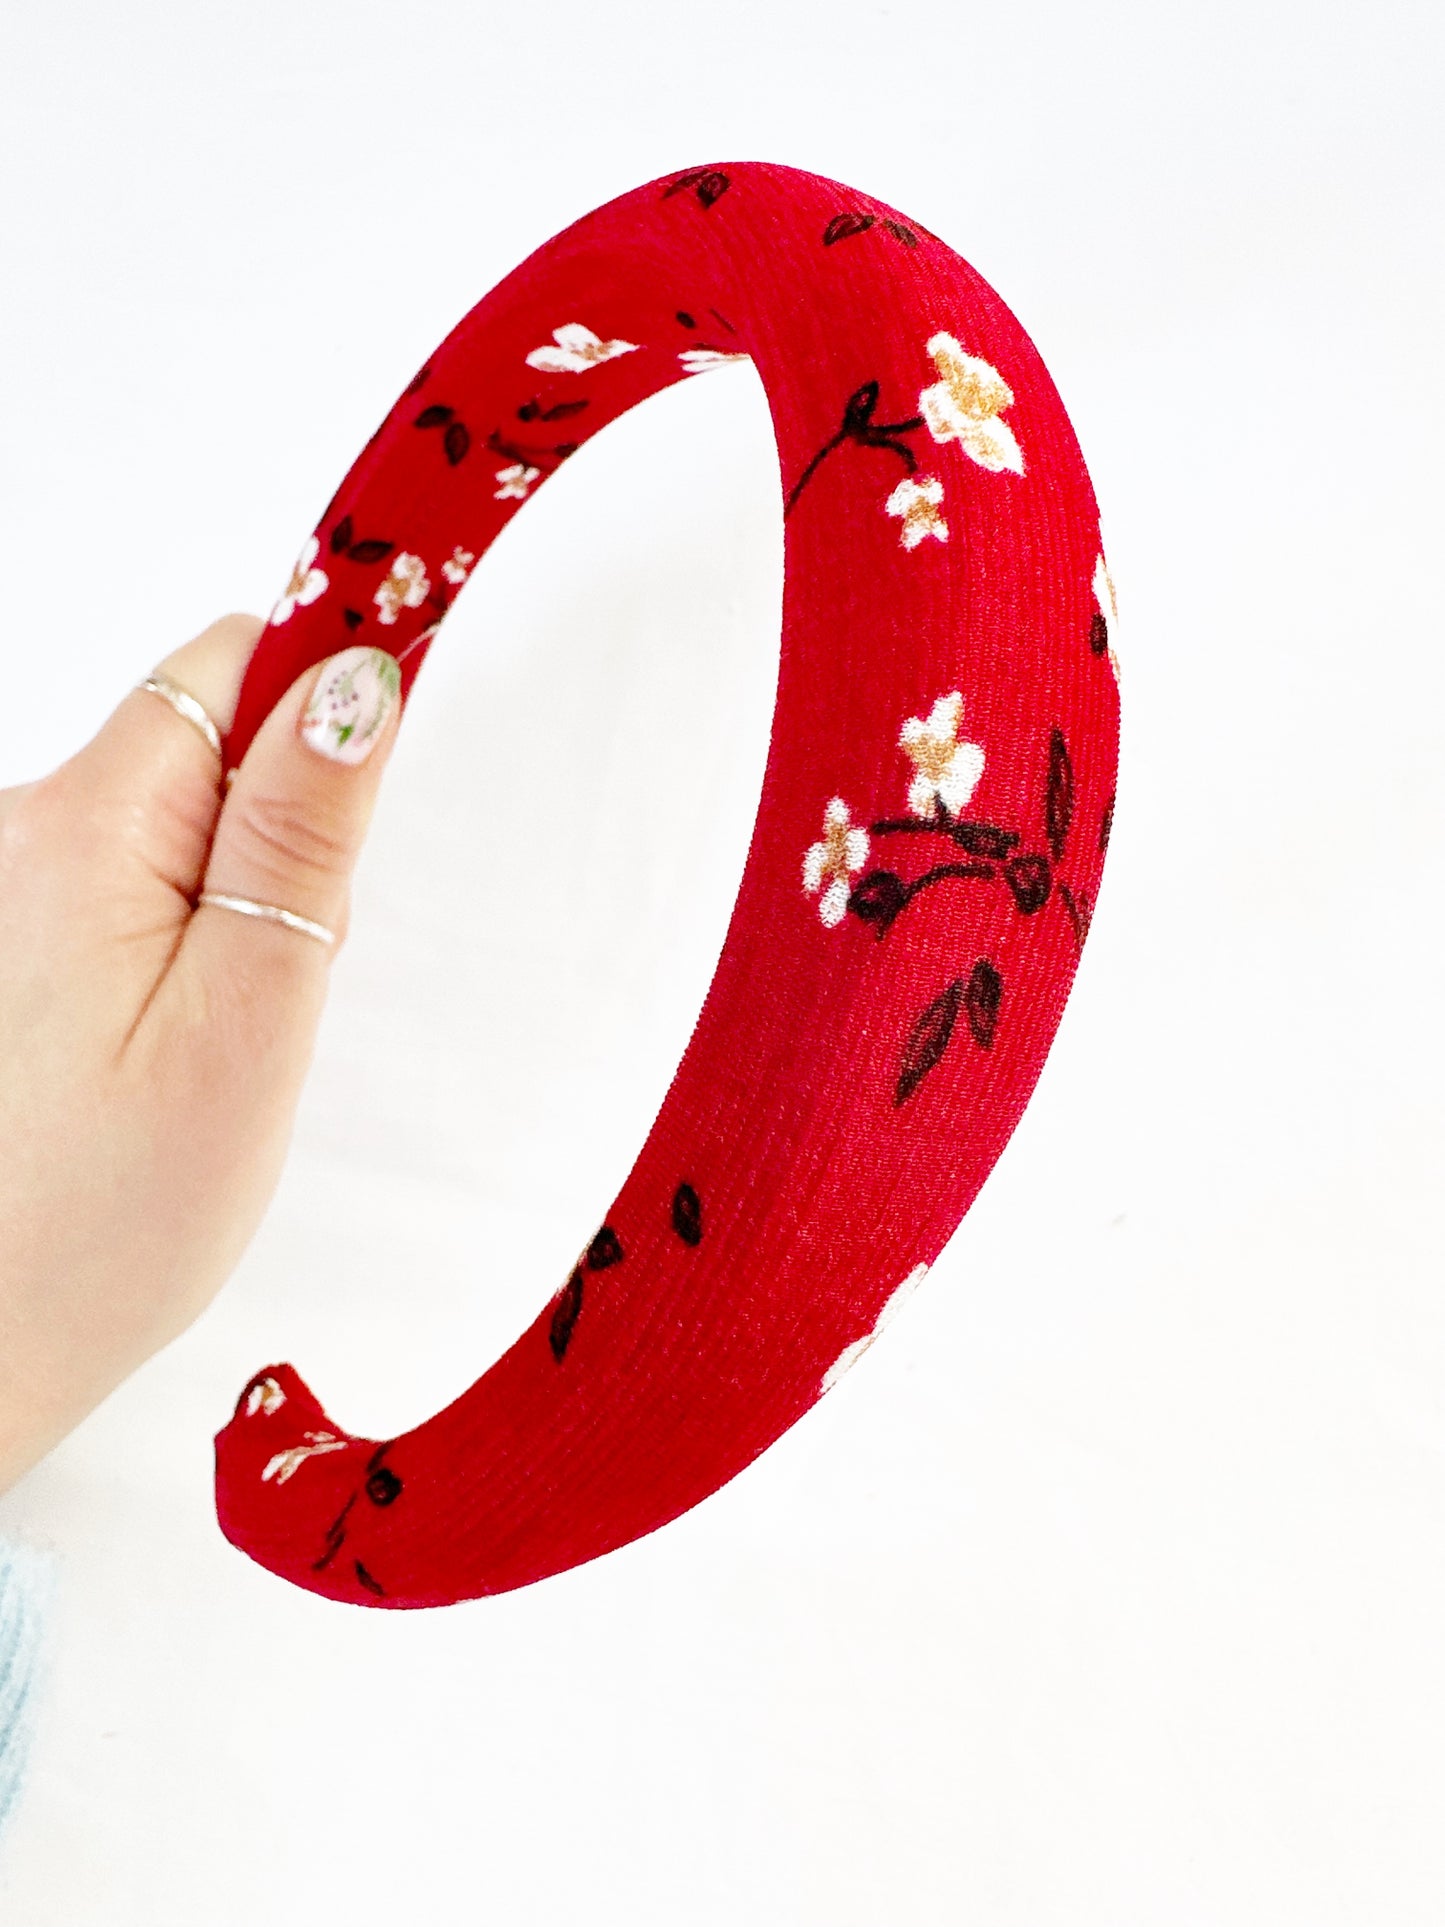 Classic Headband in red floral